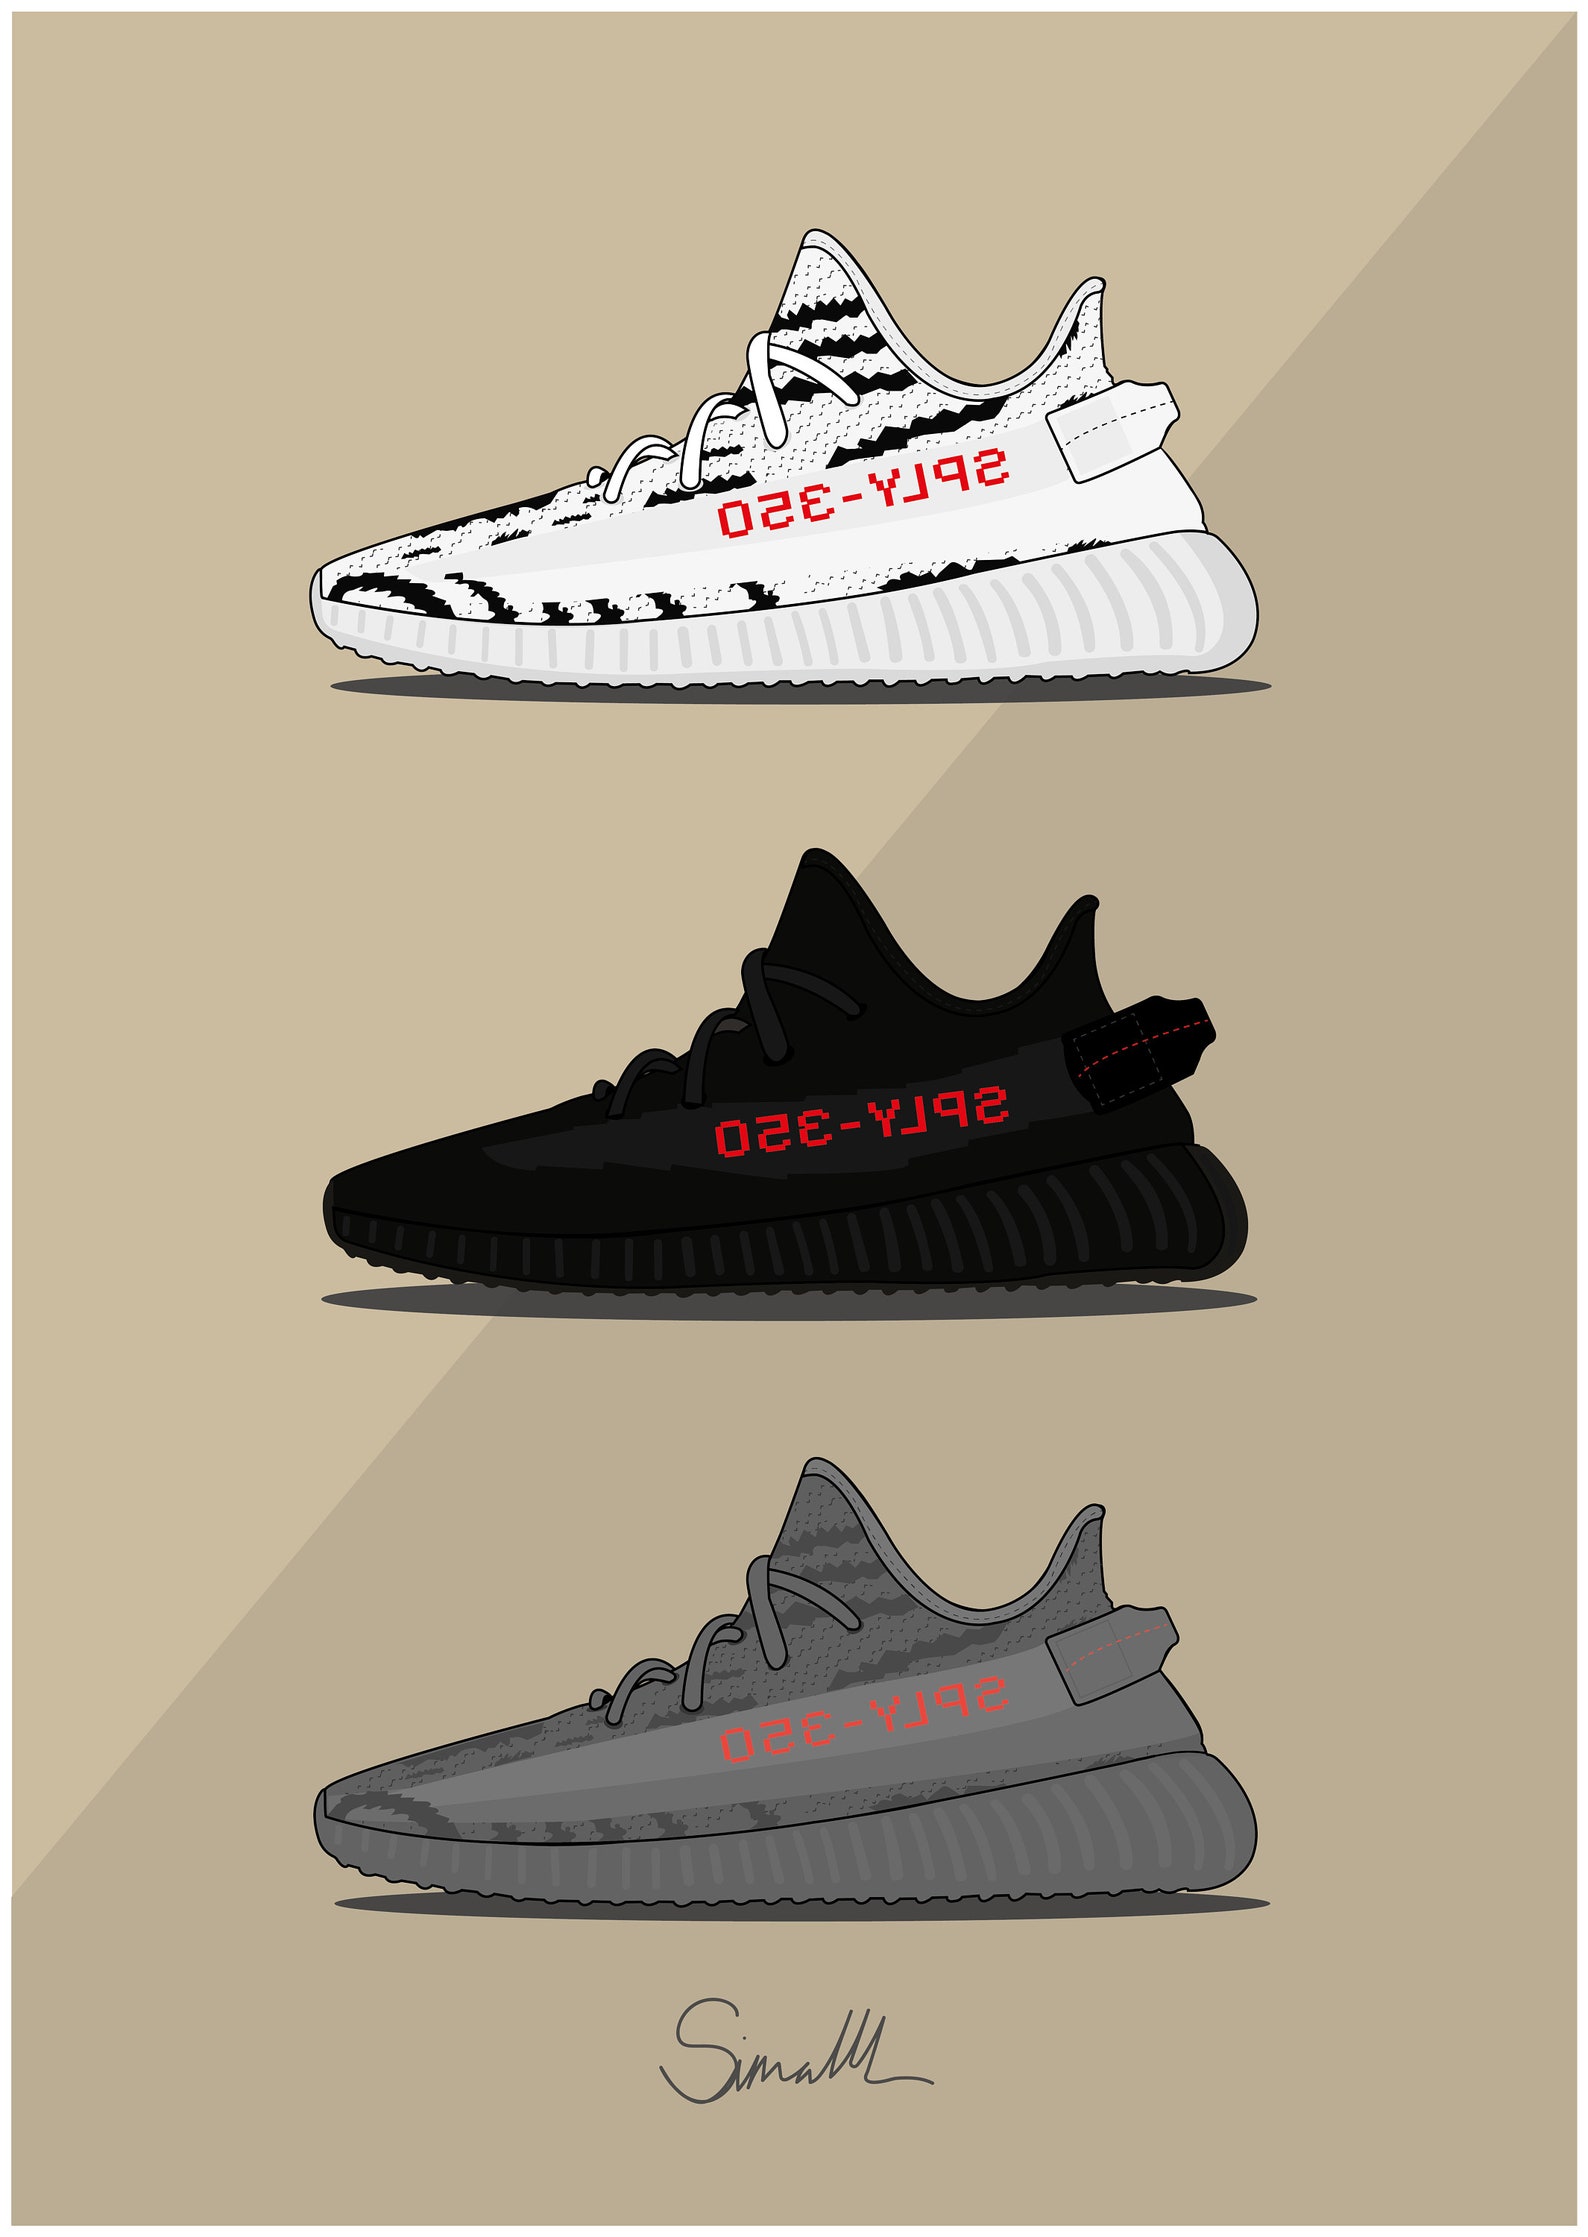 Yeezy 350 V2 PHYSICAL A2 Poster Print - Etsy